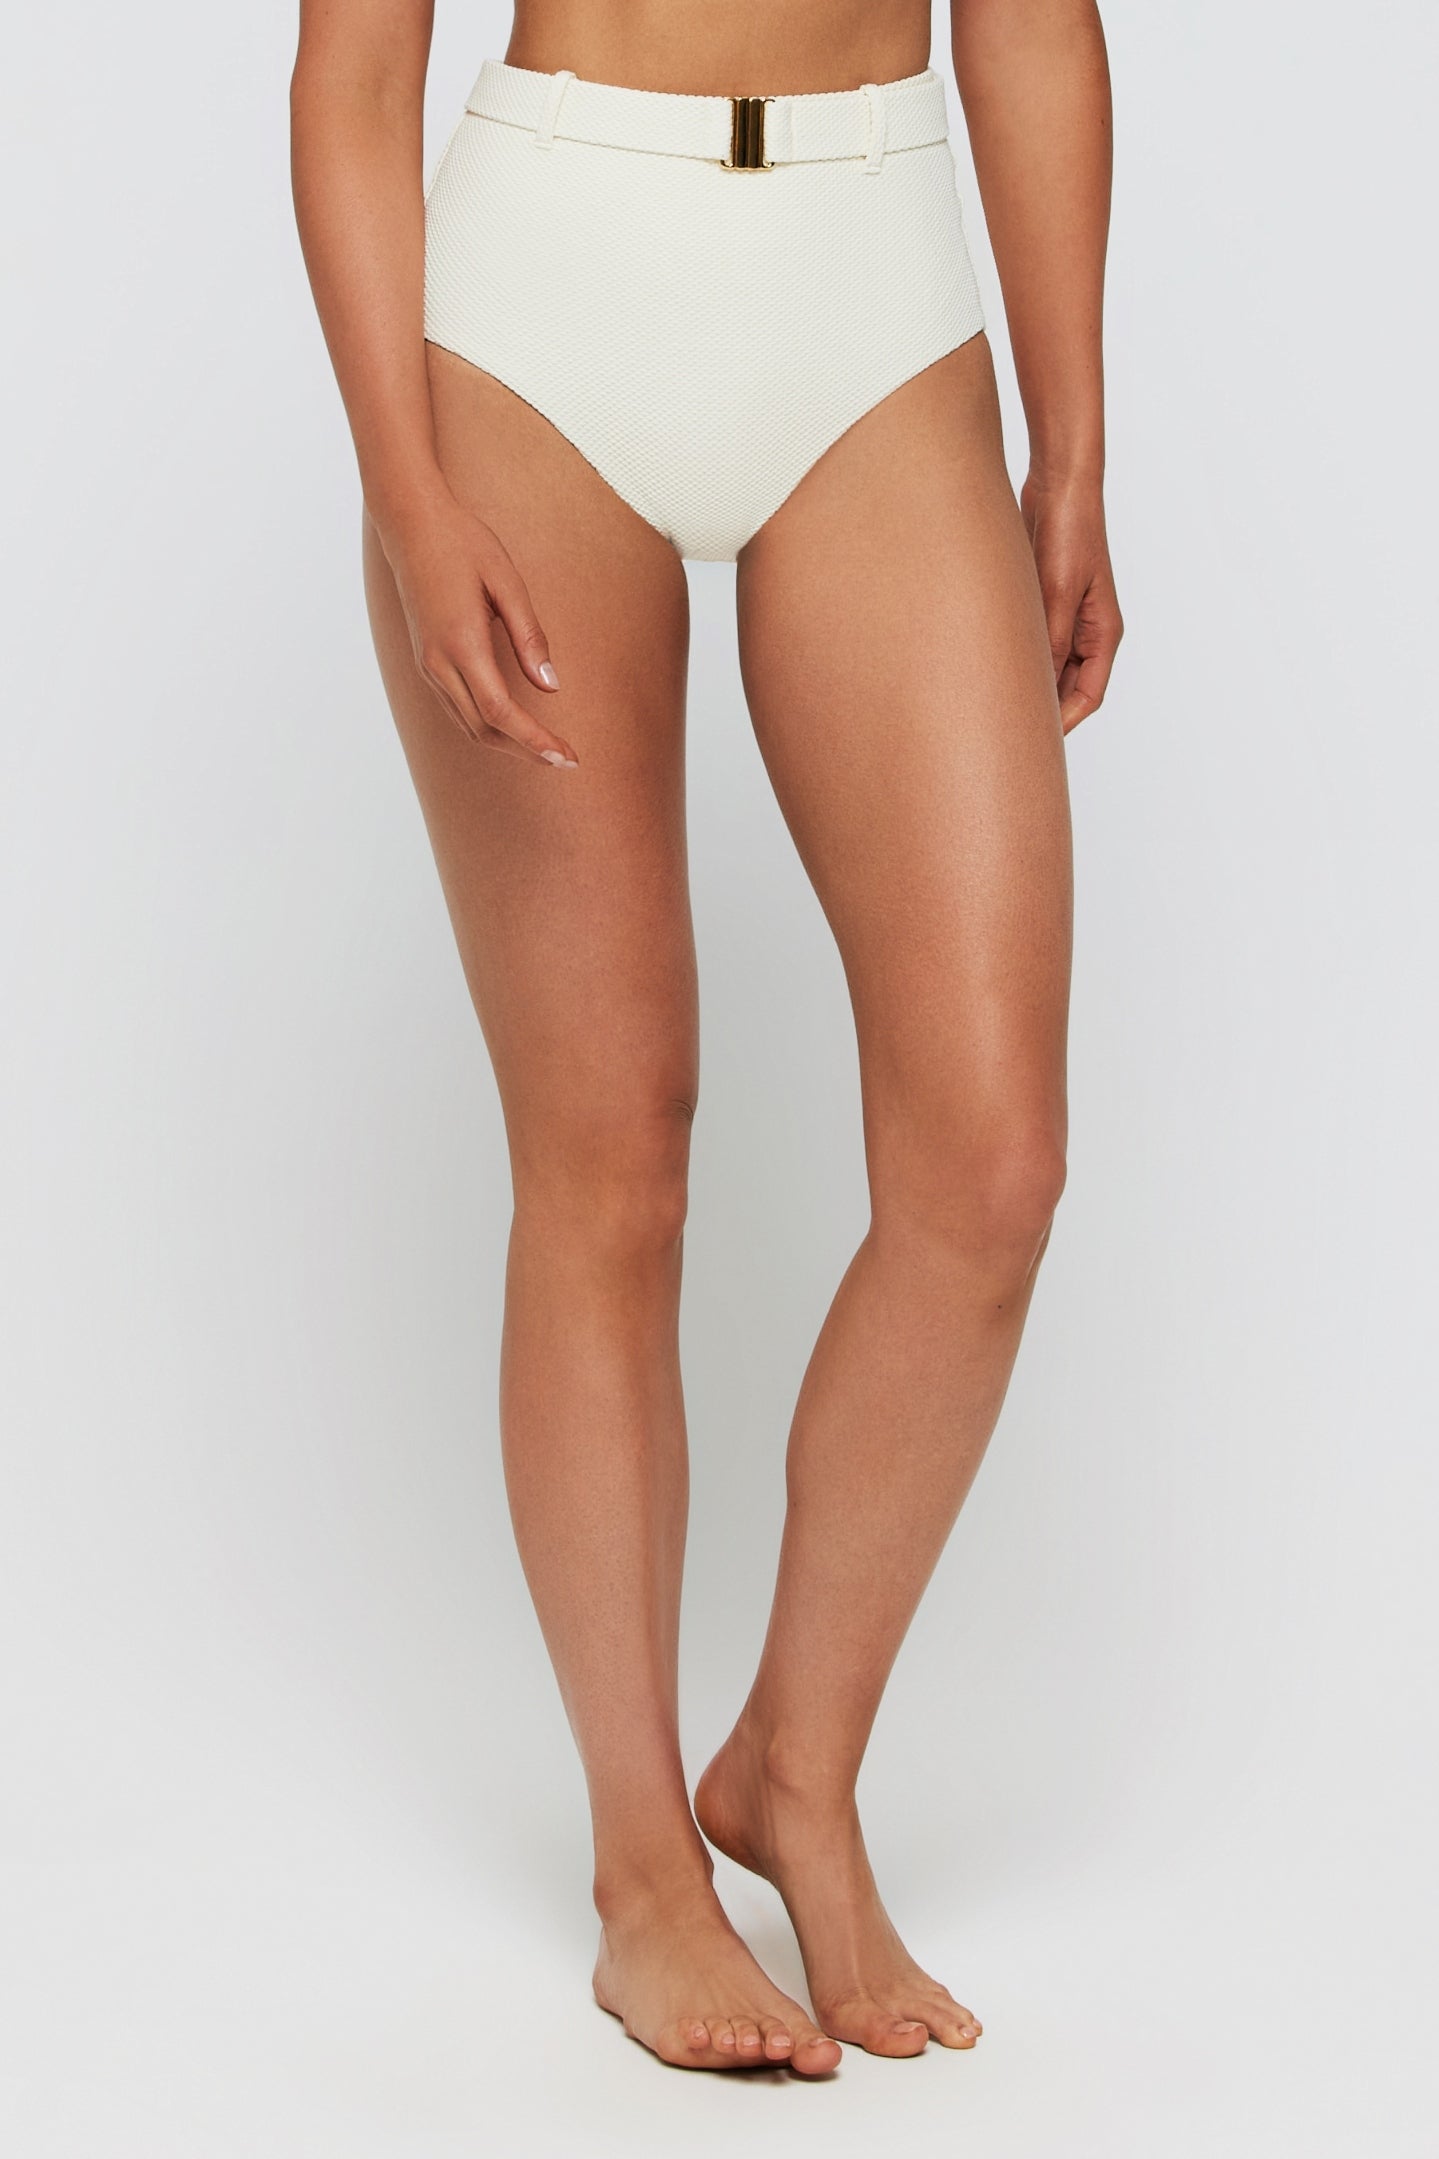 Lucia Two-Piece Swimsuit Bottom by Hermoza